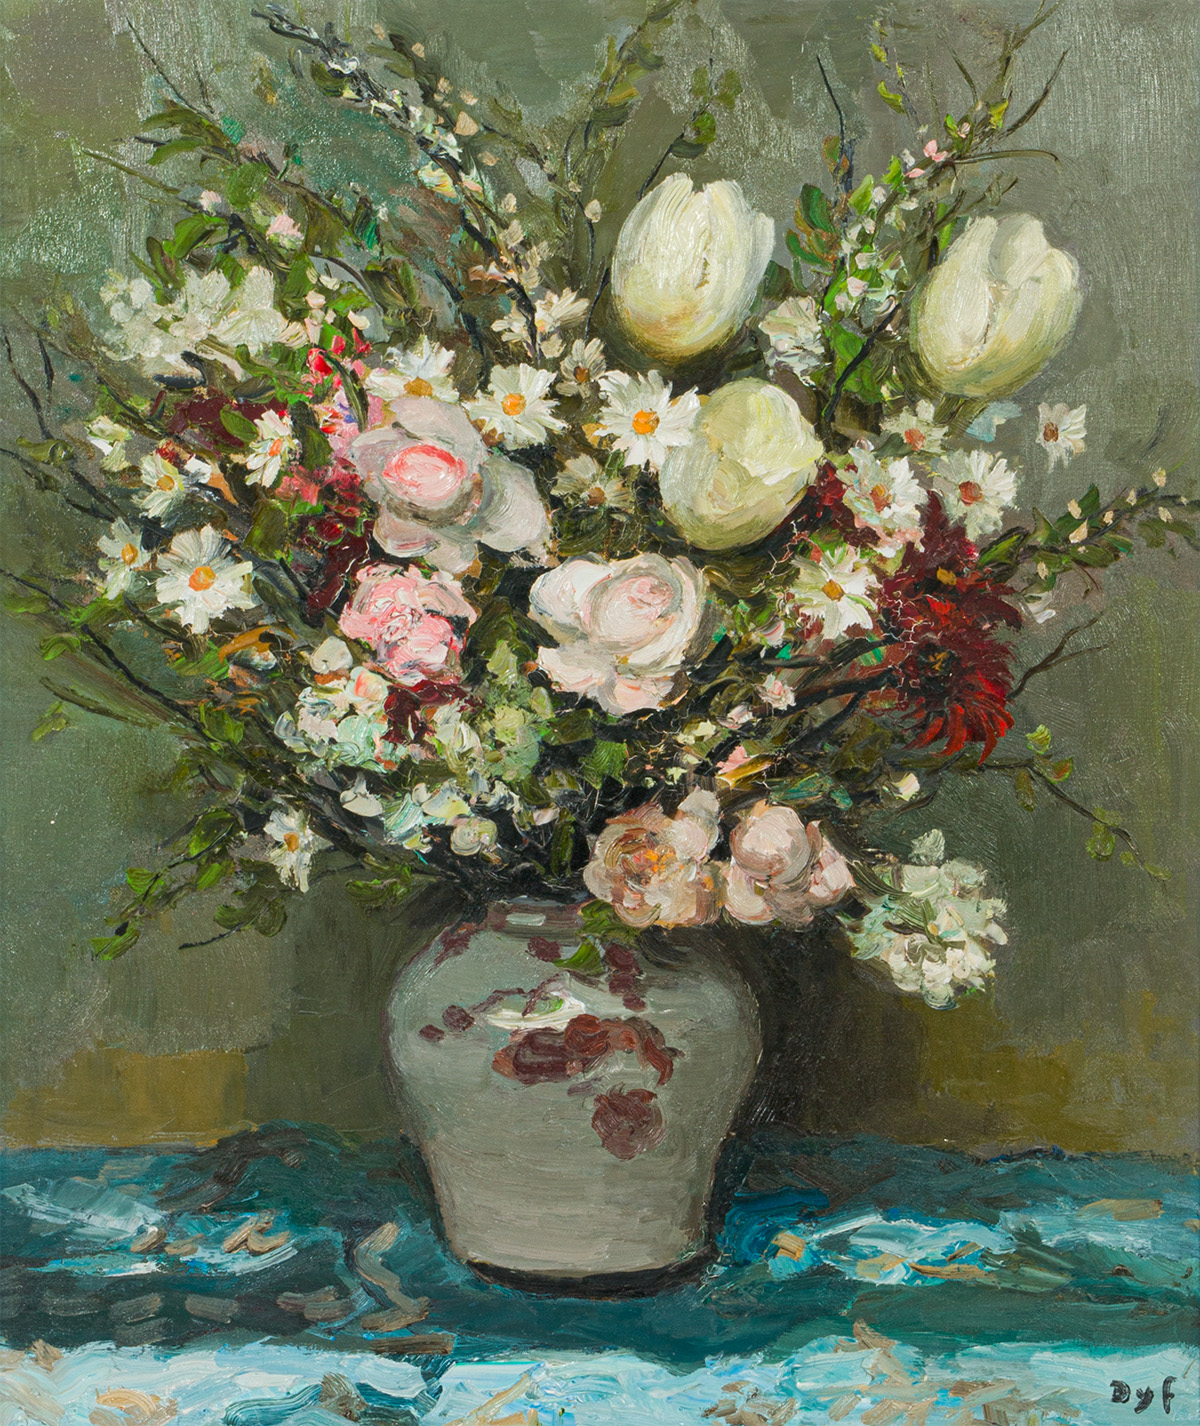 Marcel Dyf, Untitled (Still Life with Flowers).